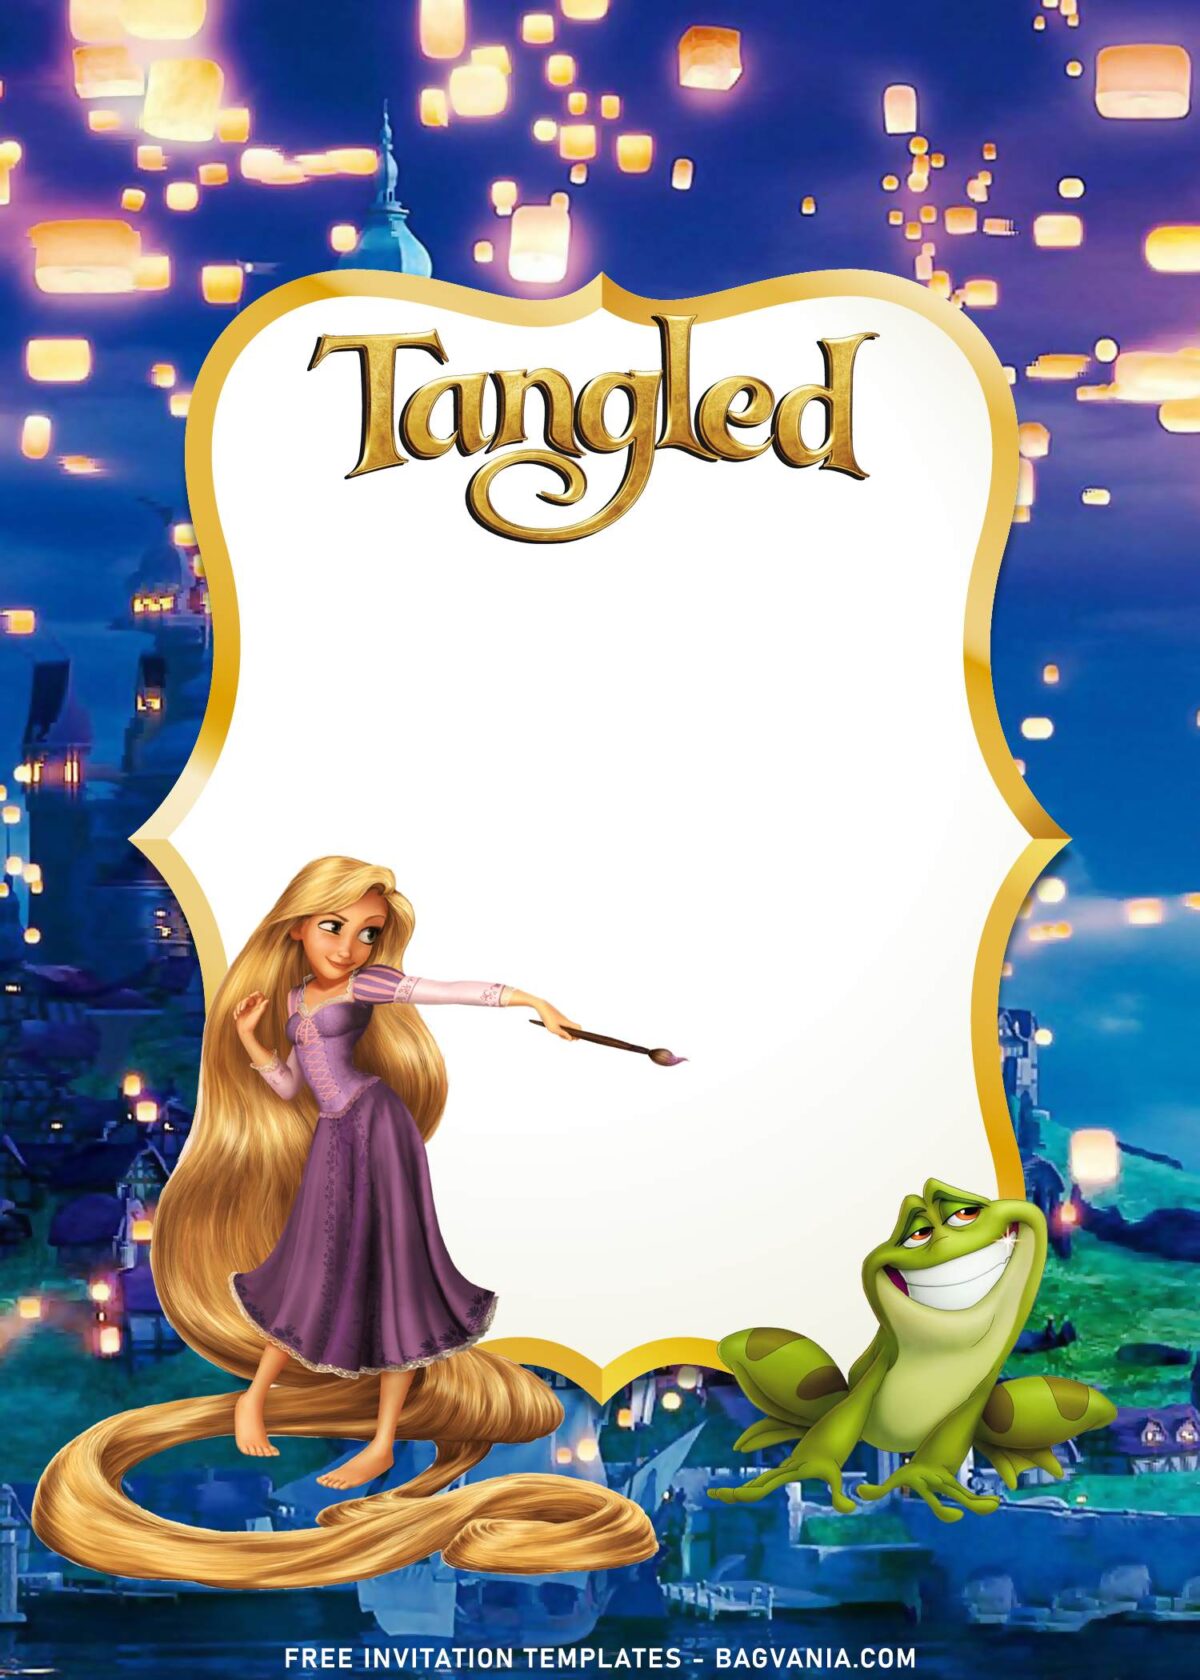 7+ Disney Tangled Rapunzel Birthday Invitation Templates with Rapunzel letting her hair down